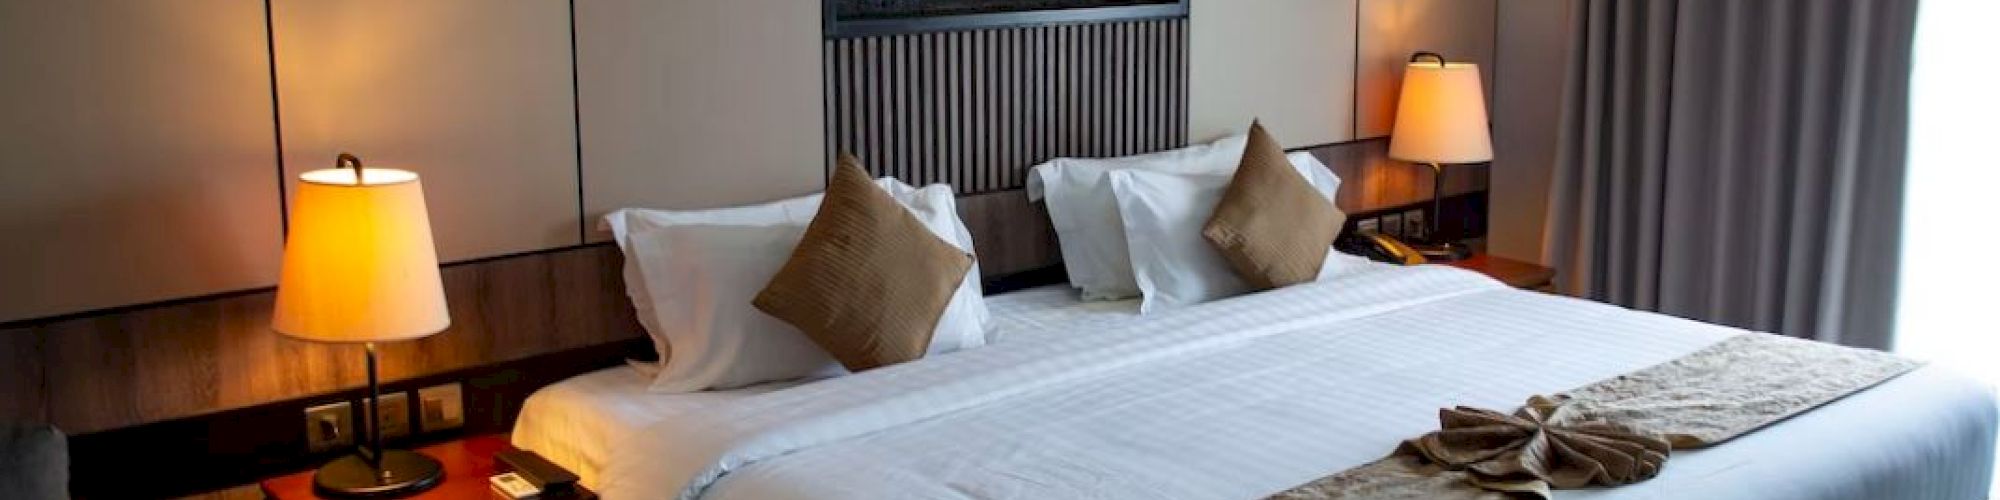 This image shows a neatly arranged hotel room with a large bed, decorative pillows, lamps on side tables, and a wall-mounted decorative piece.